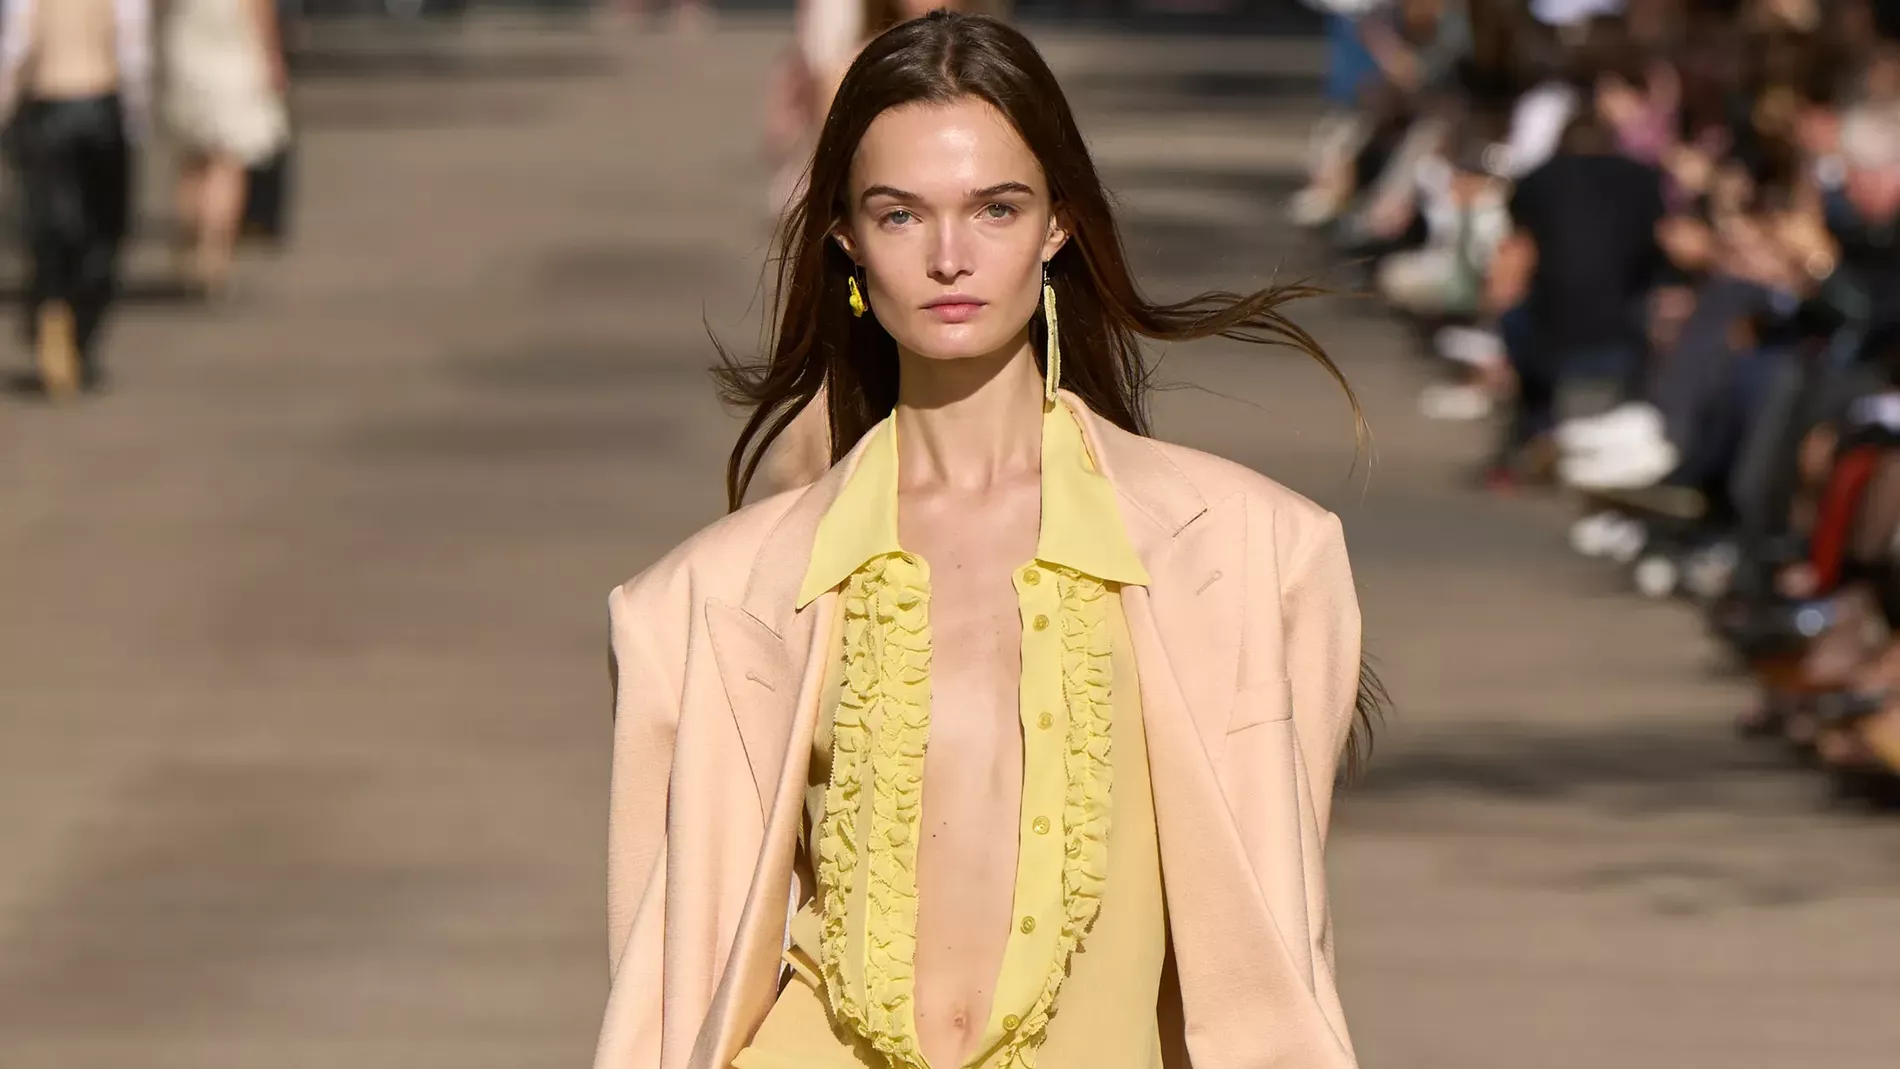 5 Things to know about the Balenciaga Spring 2023 show in Paris